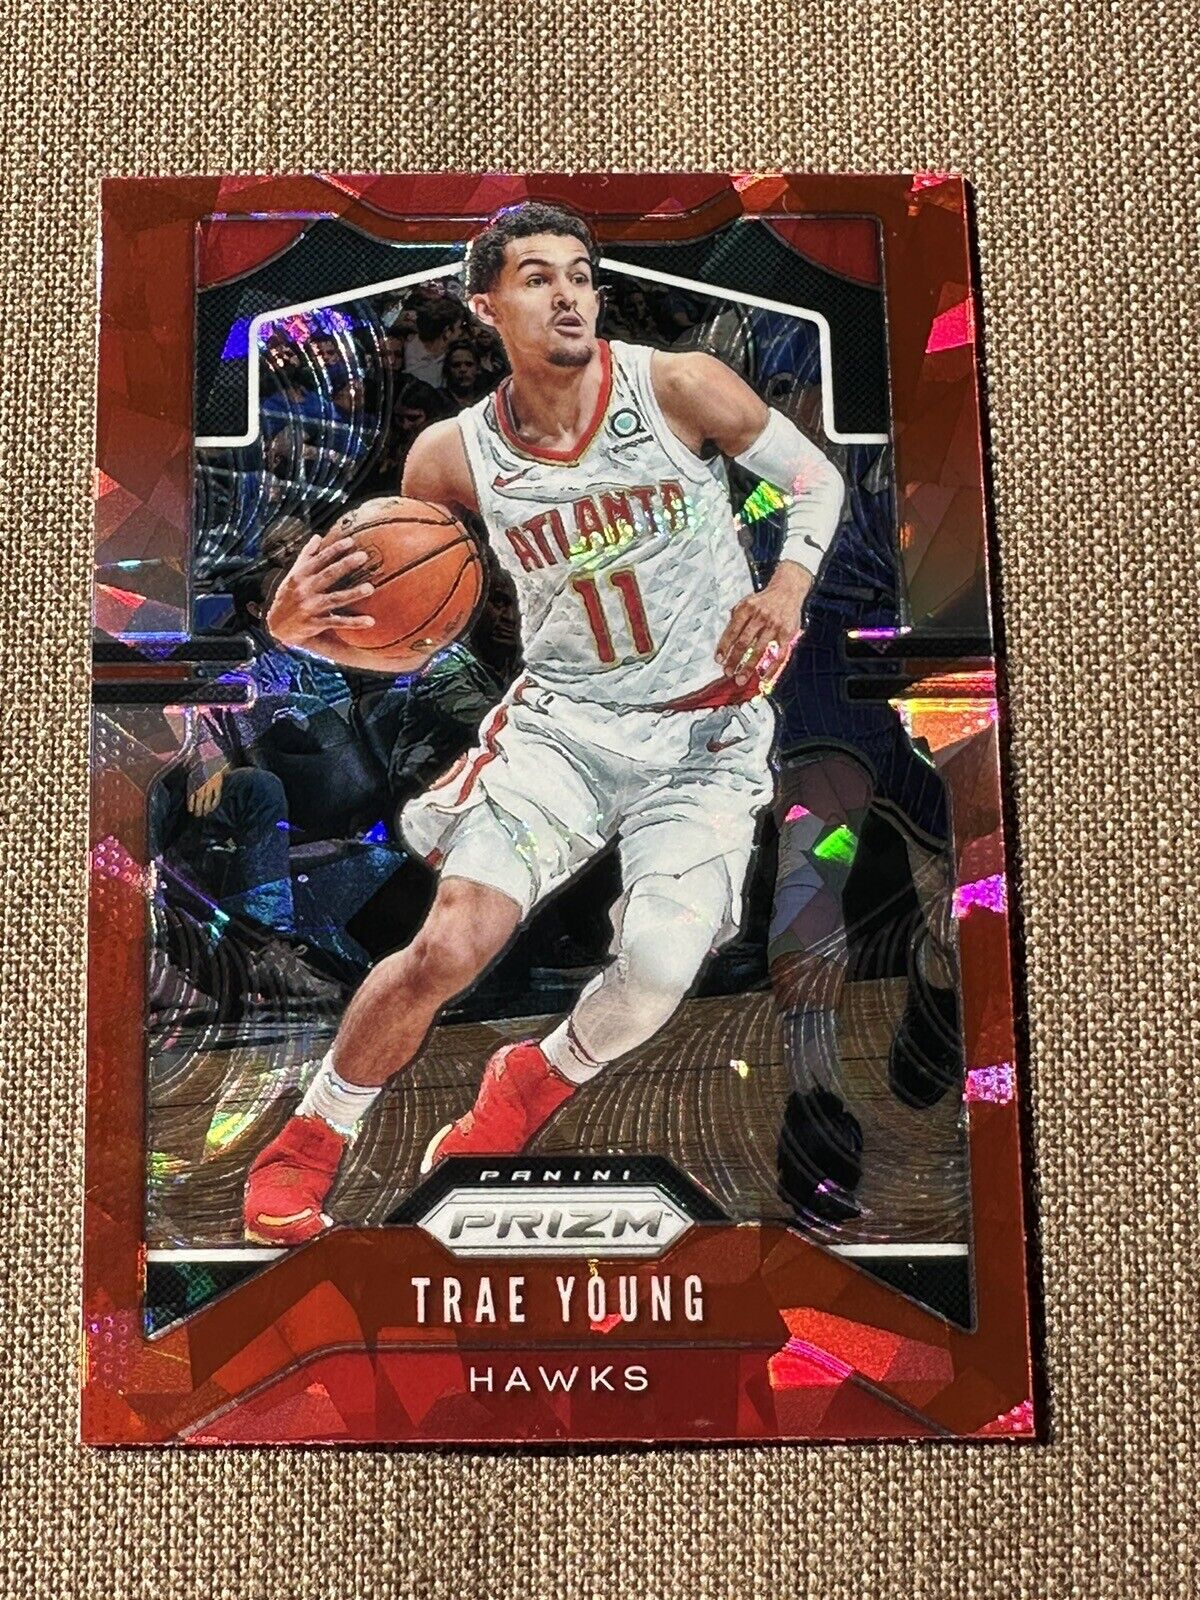 TRAE YOUNG 2019-20 PANINI PRIZM RED ICE BASKETBALL CARD #31